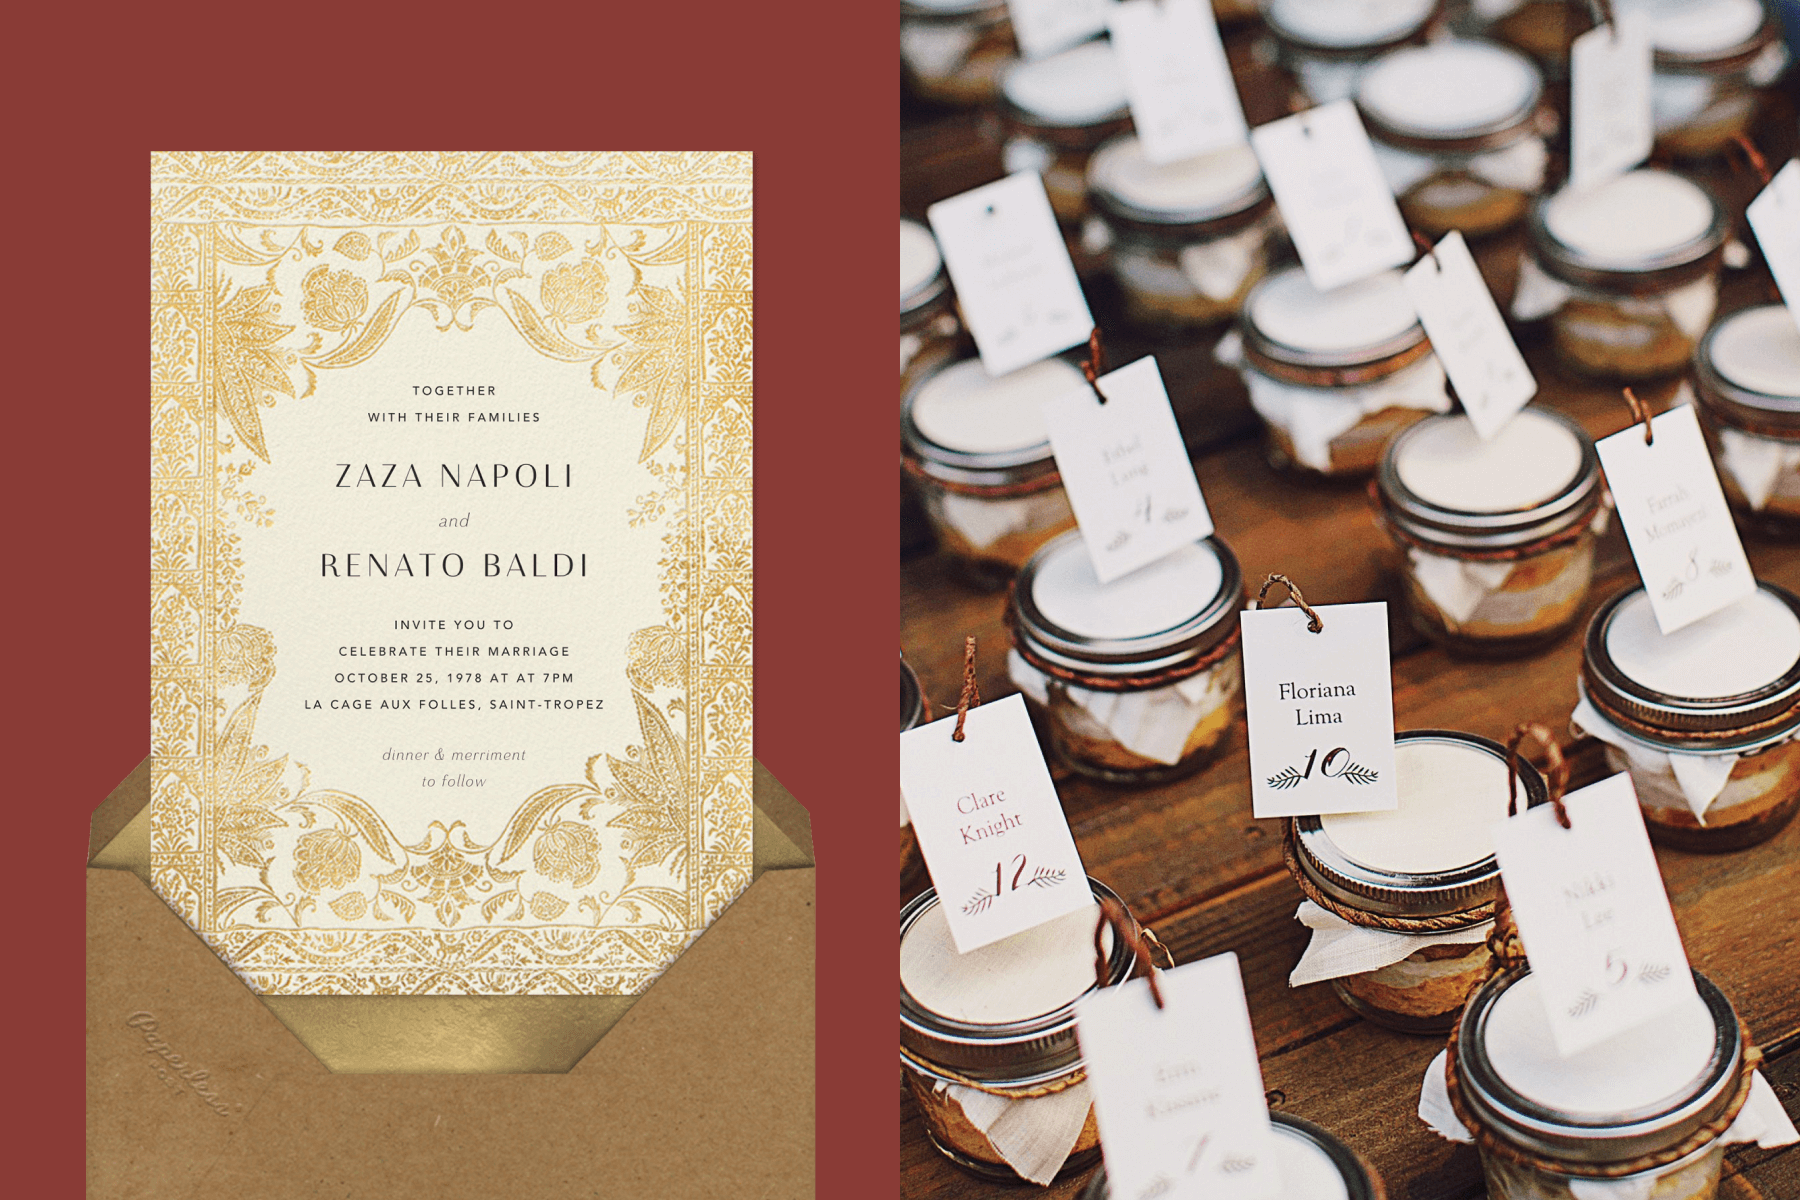 Left: Invitation with an ornate gold foil border design. Right: Seat numbers that double as wedding favors in small glass jars